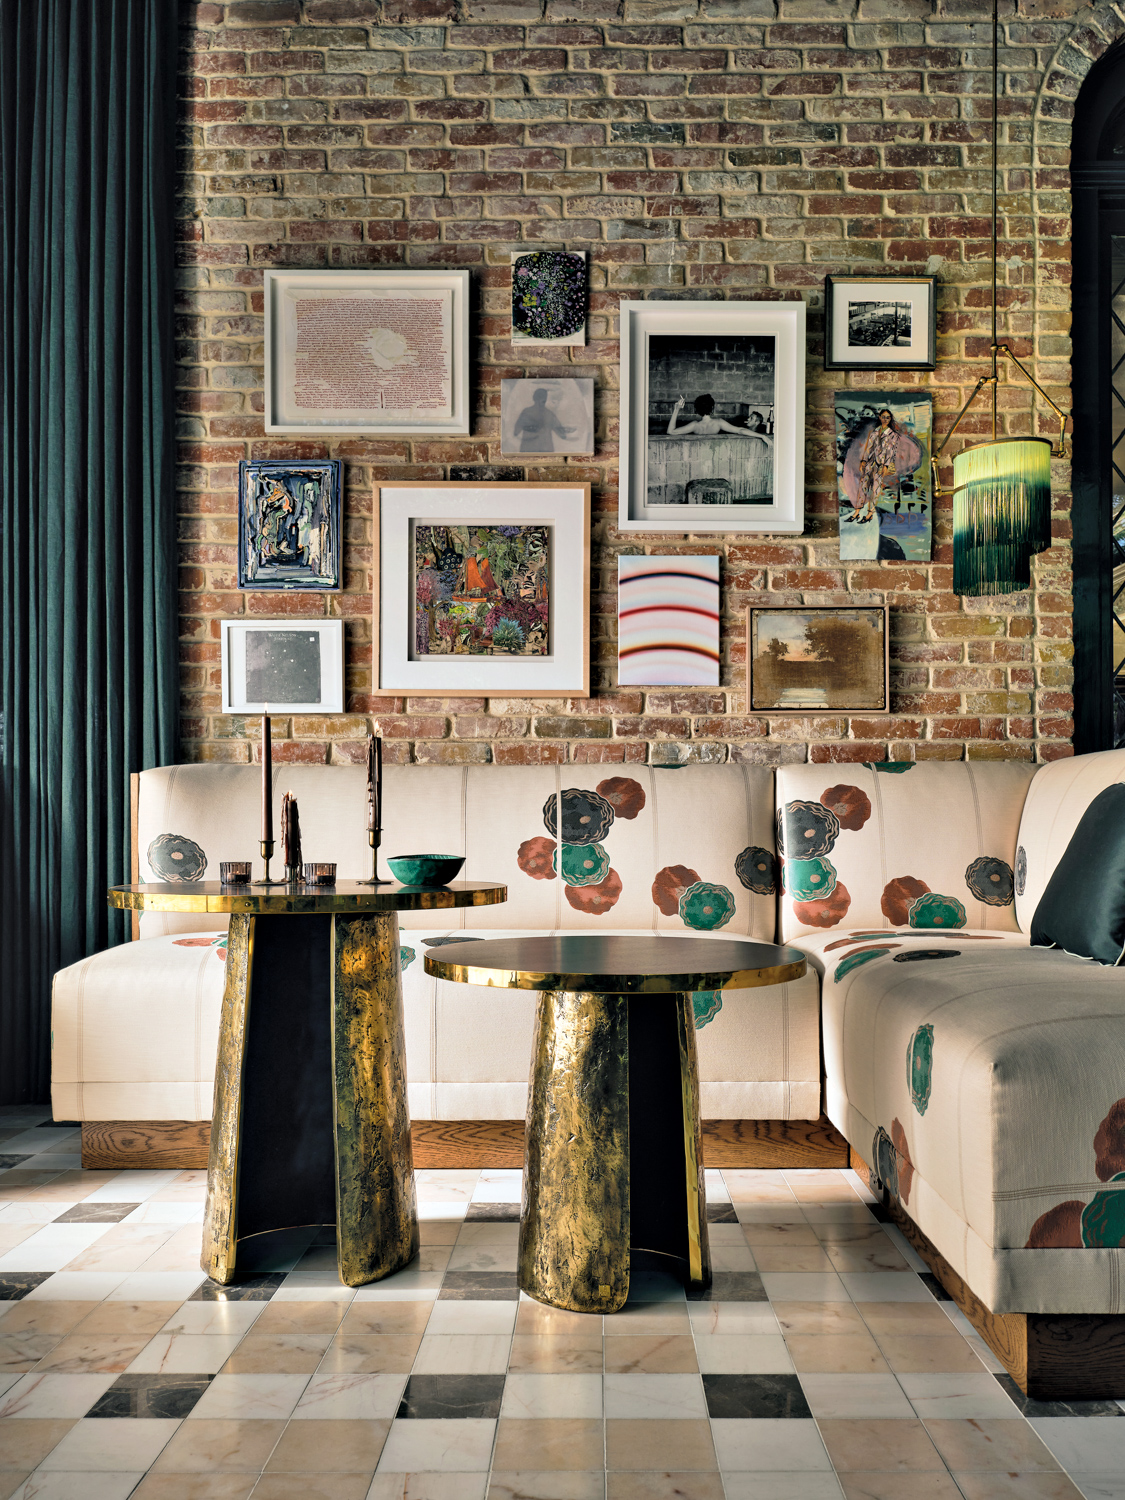 Gallery wall of artwork on exposed brick wall backs sectional banquette and set of 2 brass cocktail tables.